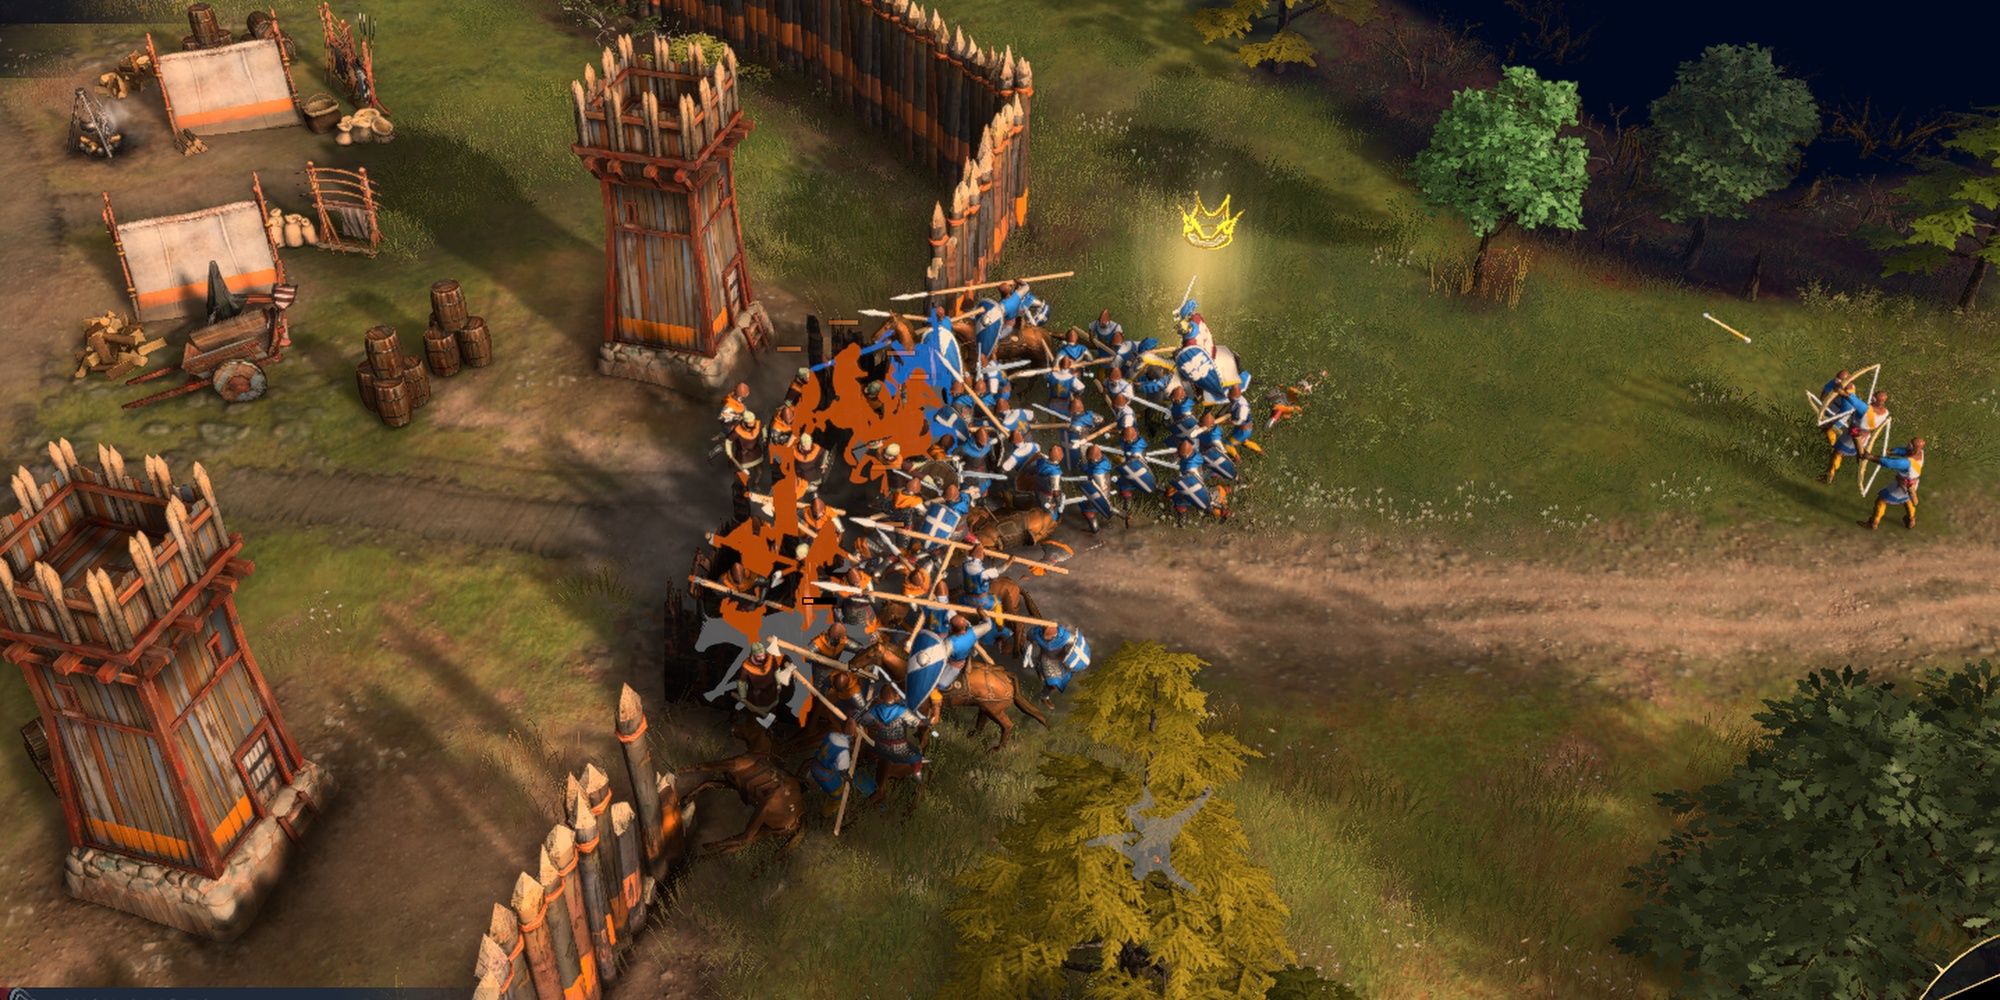 Age Of Empires IV: Battle Between Units Descending Into Anarchy